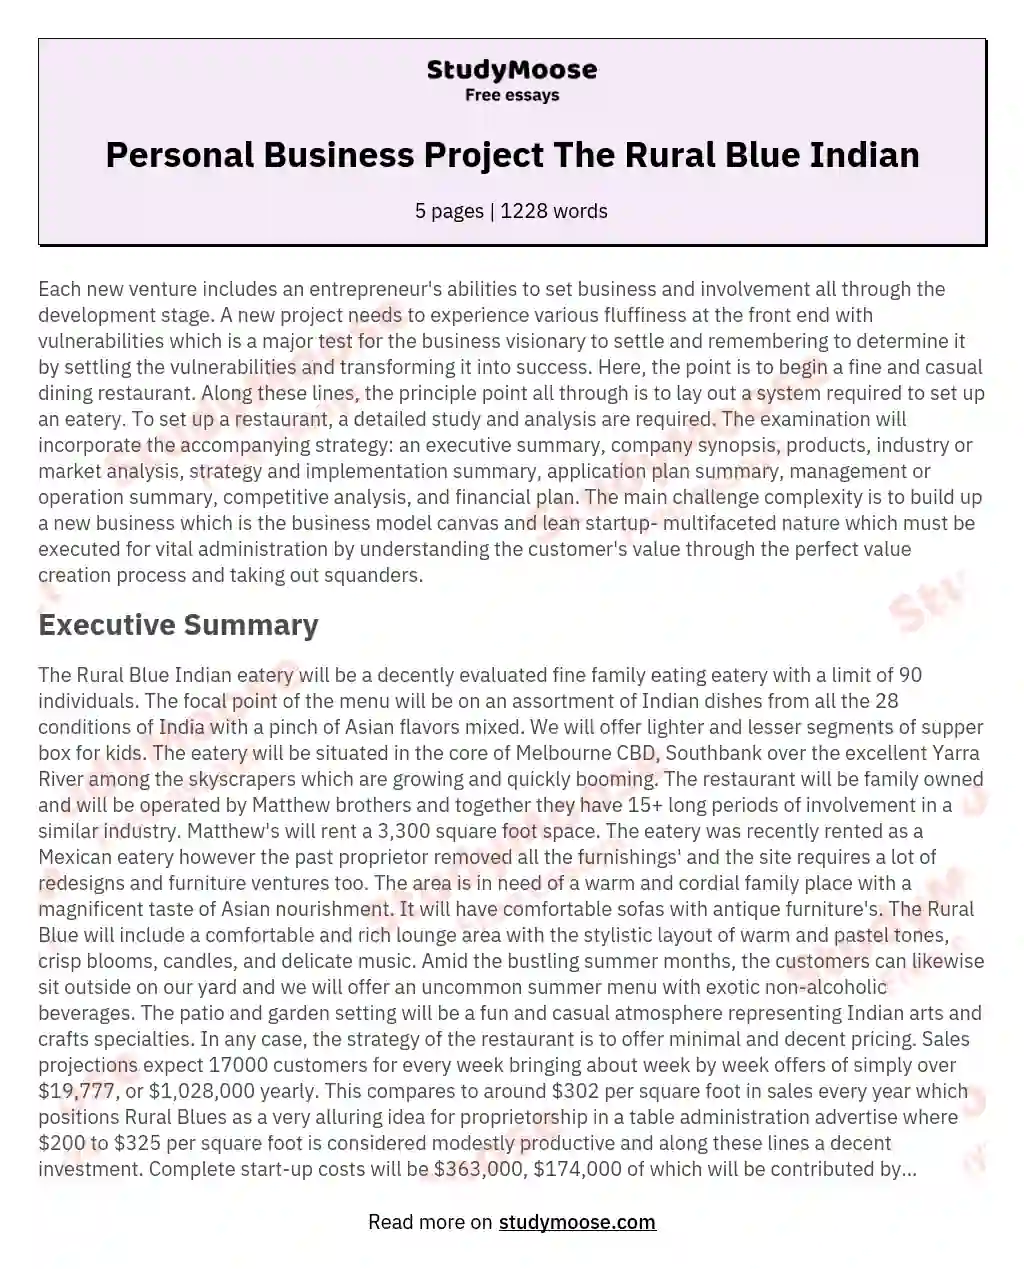 Personal Business Project The Rural Blue Indian